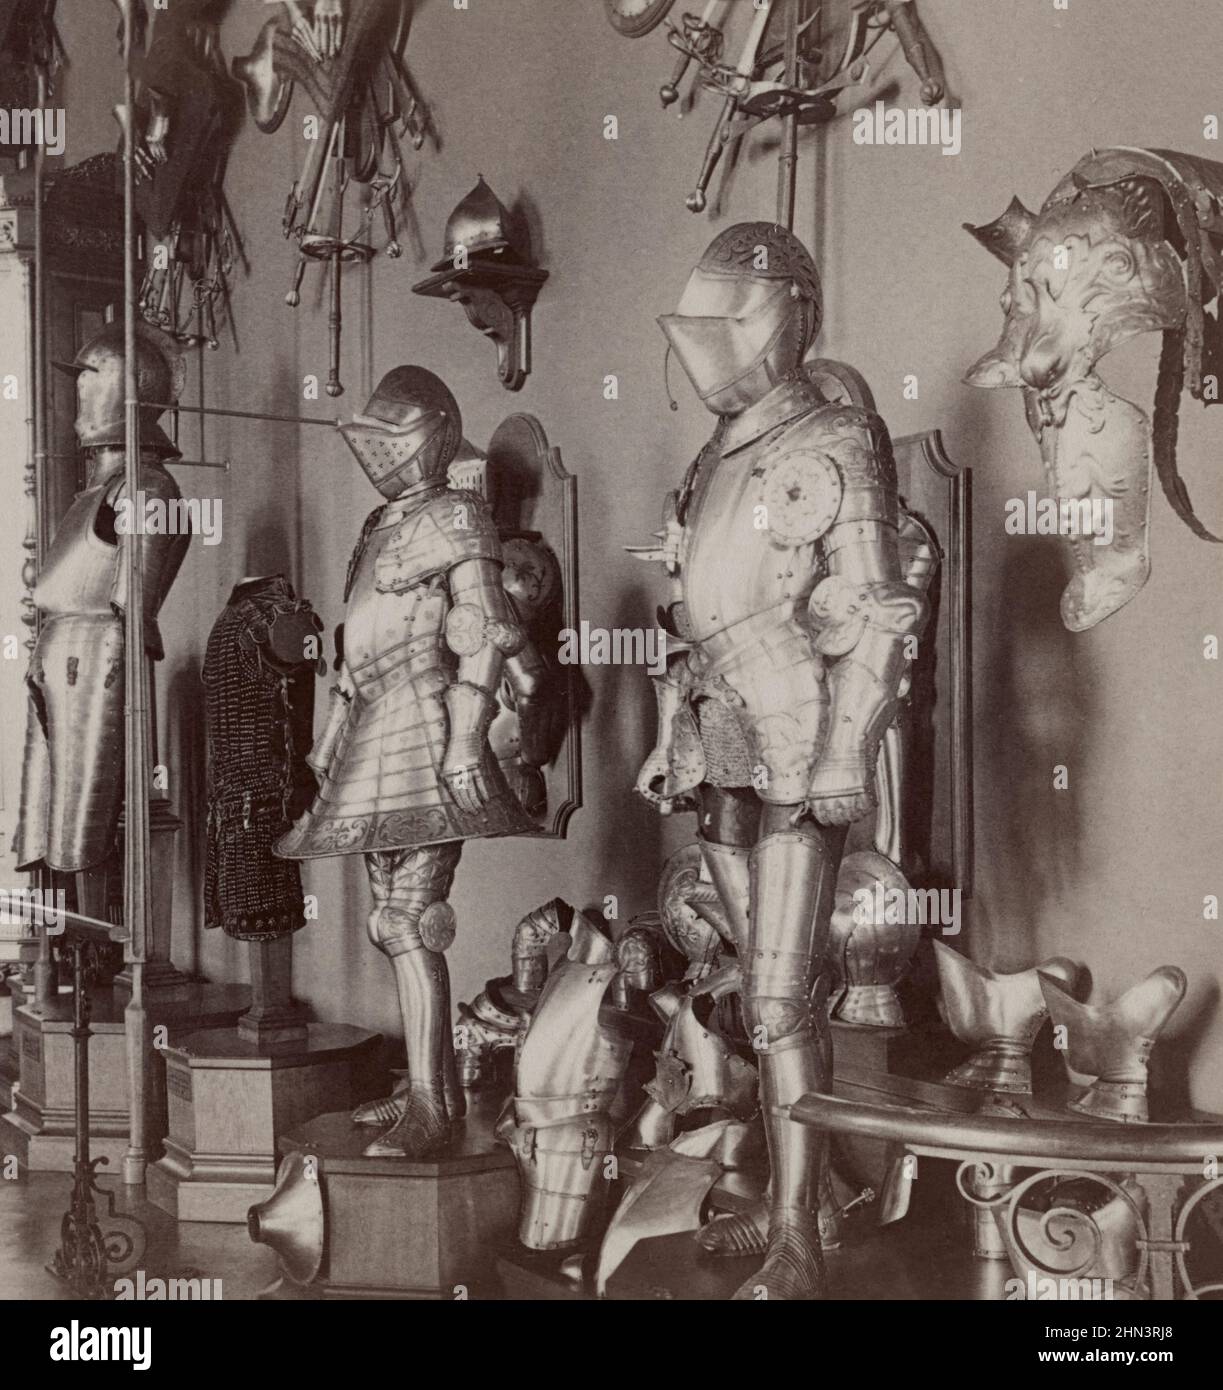 Vintage photo of armor suits of the Archbishops of Salzburg (15th century), Imperial Armory. Vienna, Austria. 1898 Stock Photo